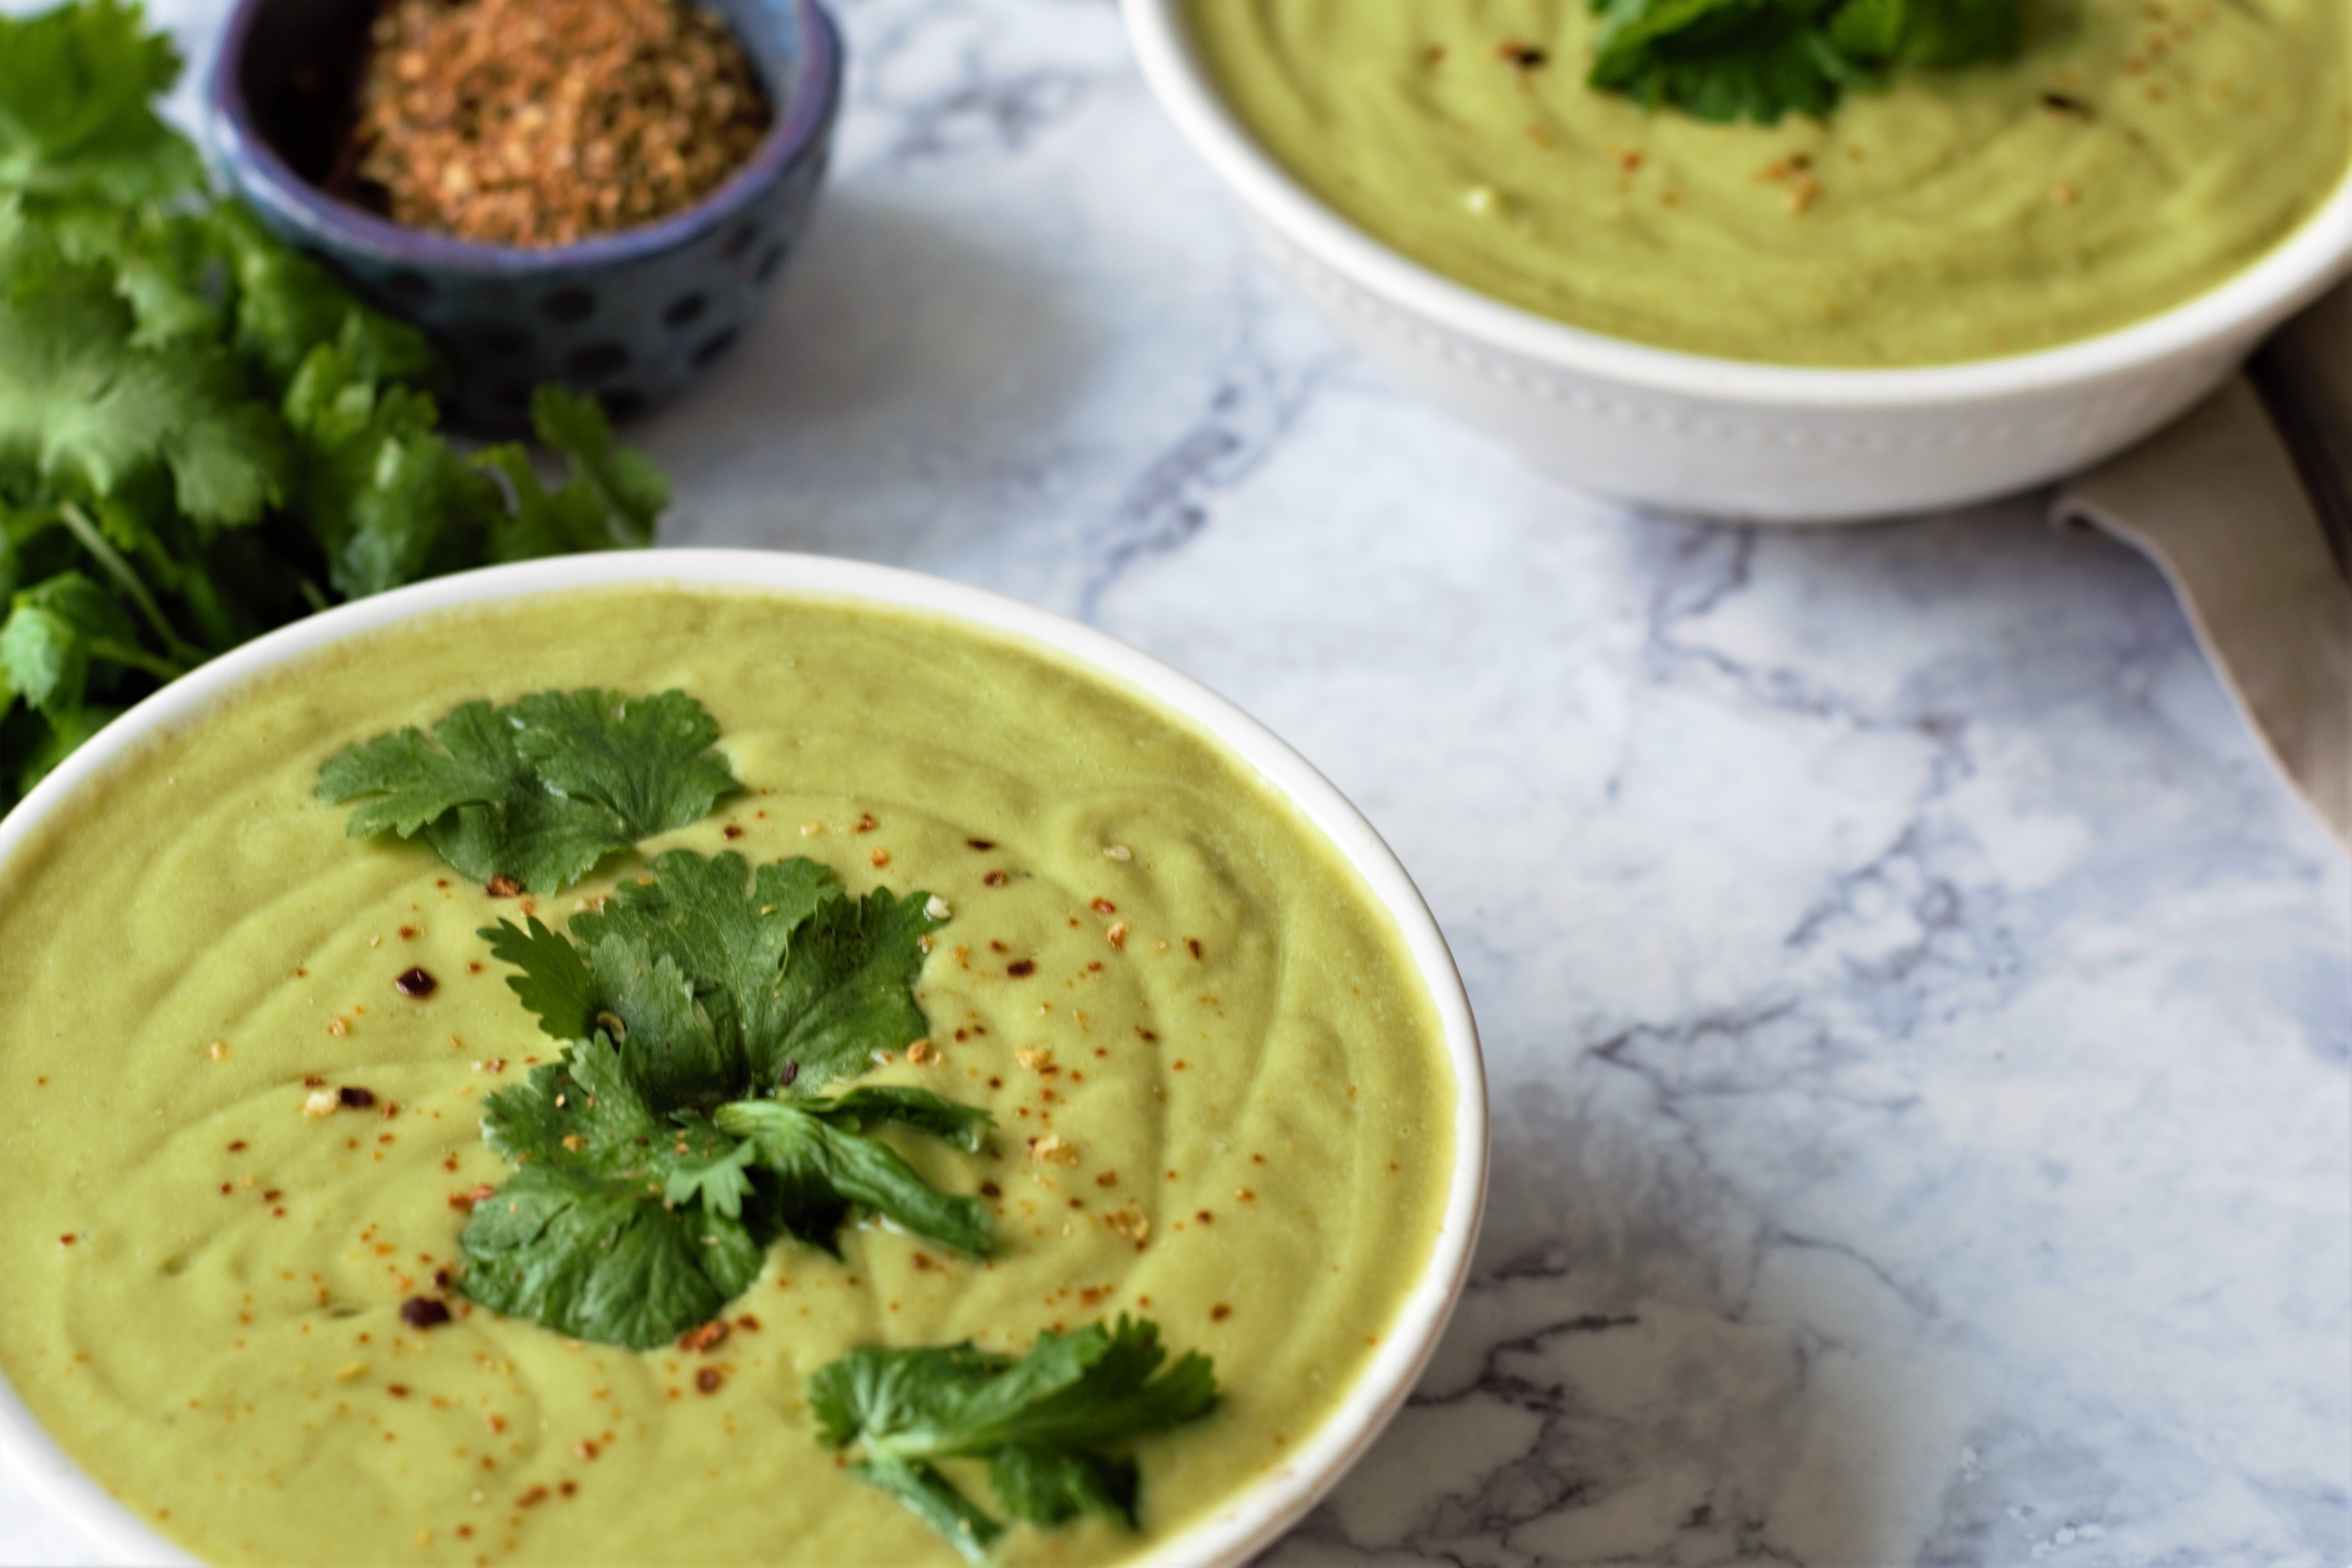 Gluten Free and vegan Chilled Avocado Soup Recipe